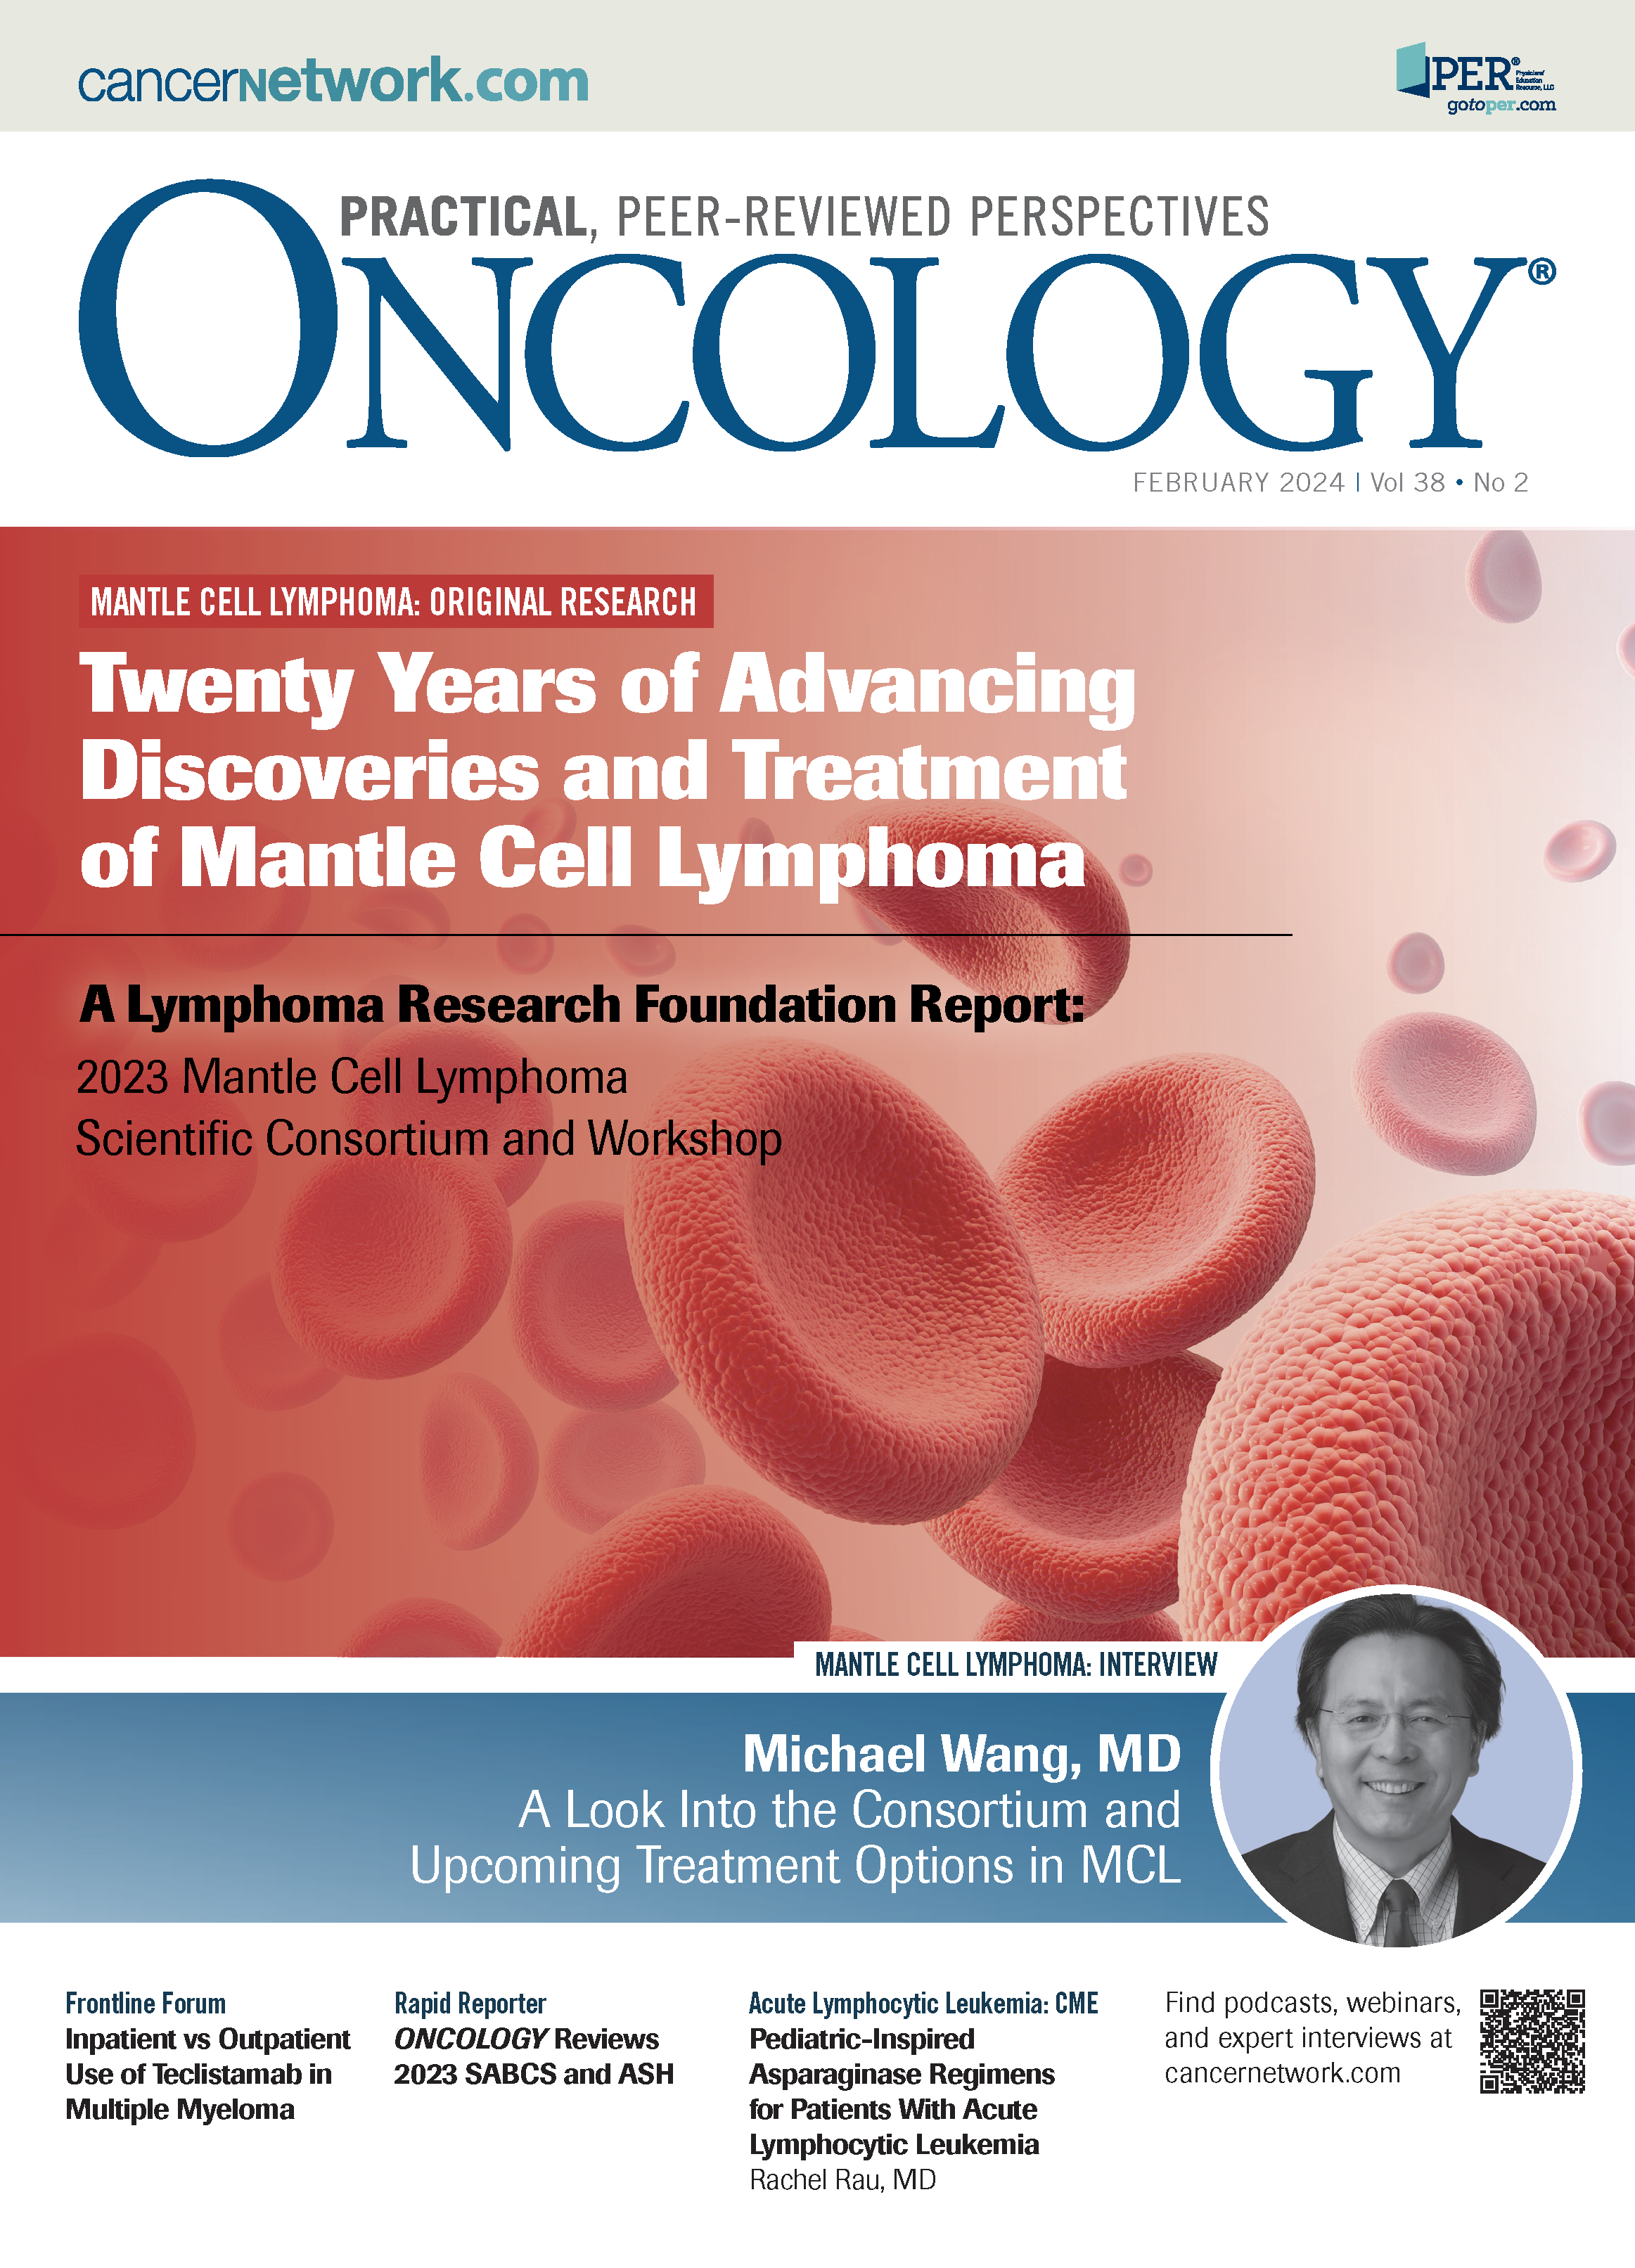 ONCOLOGY Vol 38, Issue 2